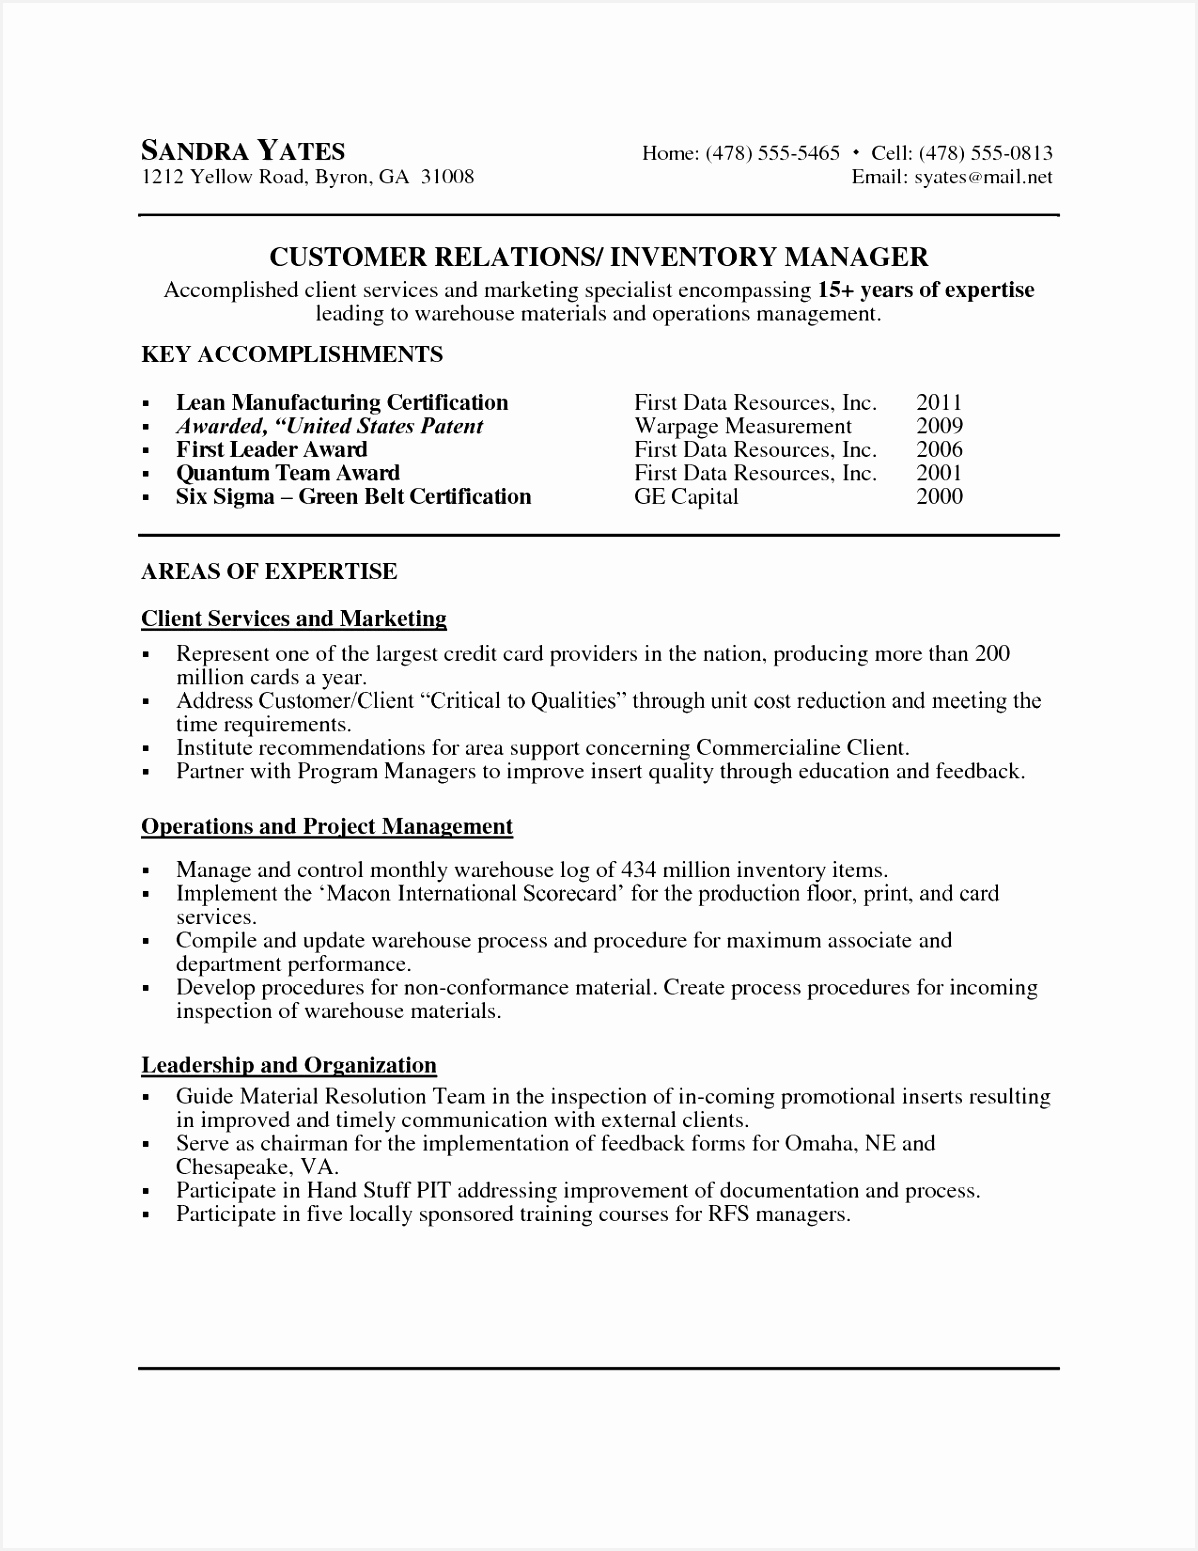 American Resume Sample New Student Resume 0d Wallpapers 42 Awesome management 15511198kfuUt